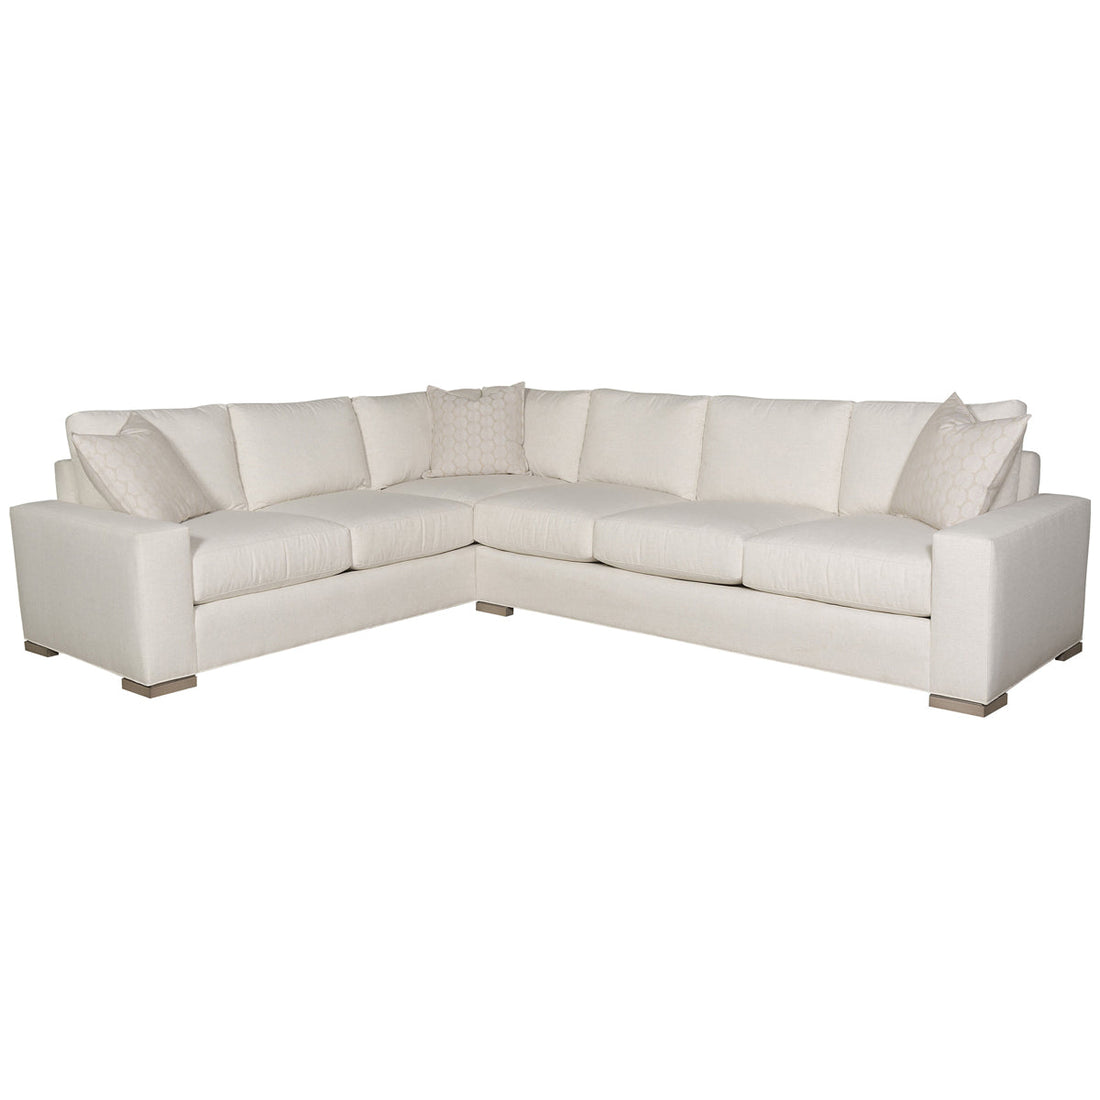 Vanguard Furniture Paxton Sectional